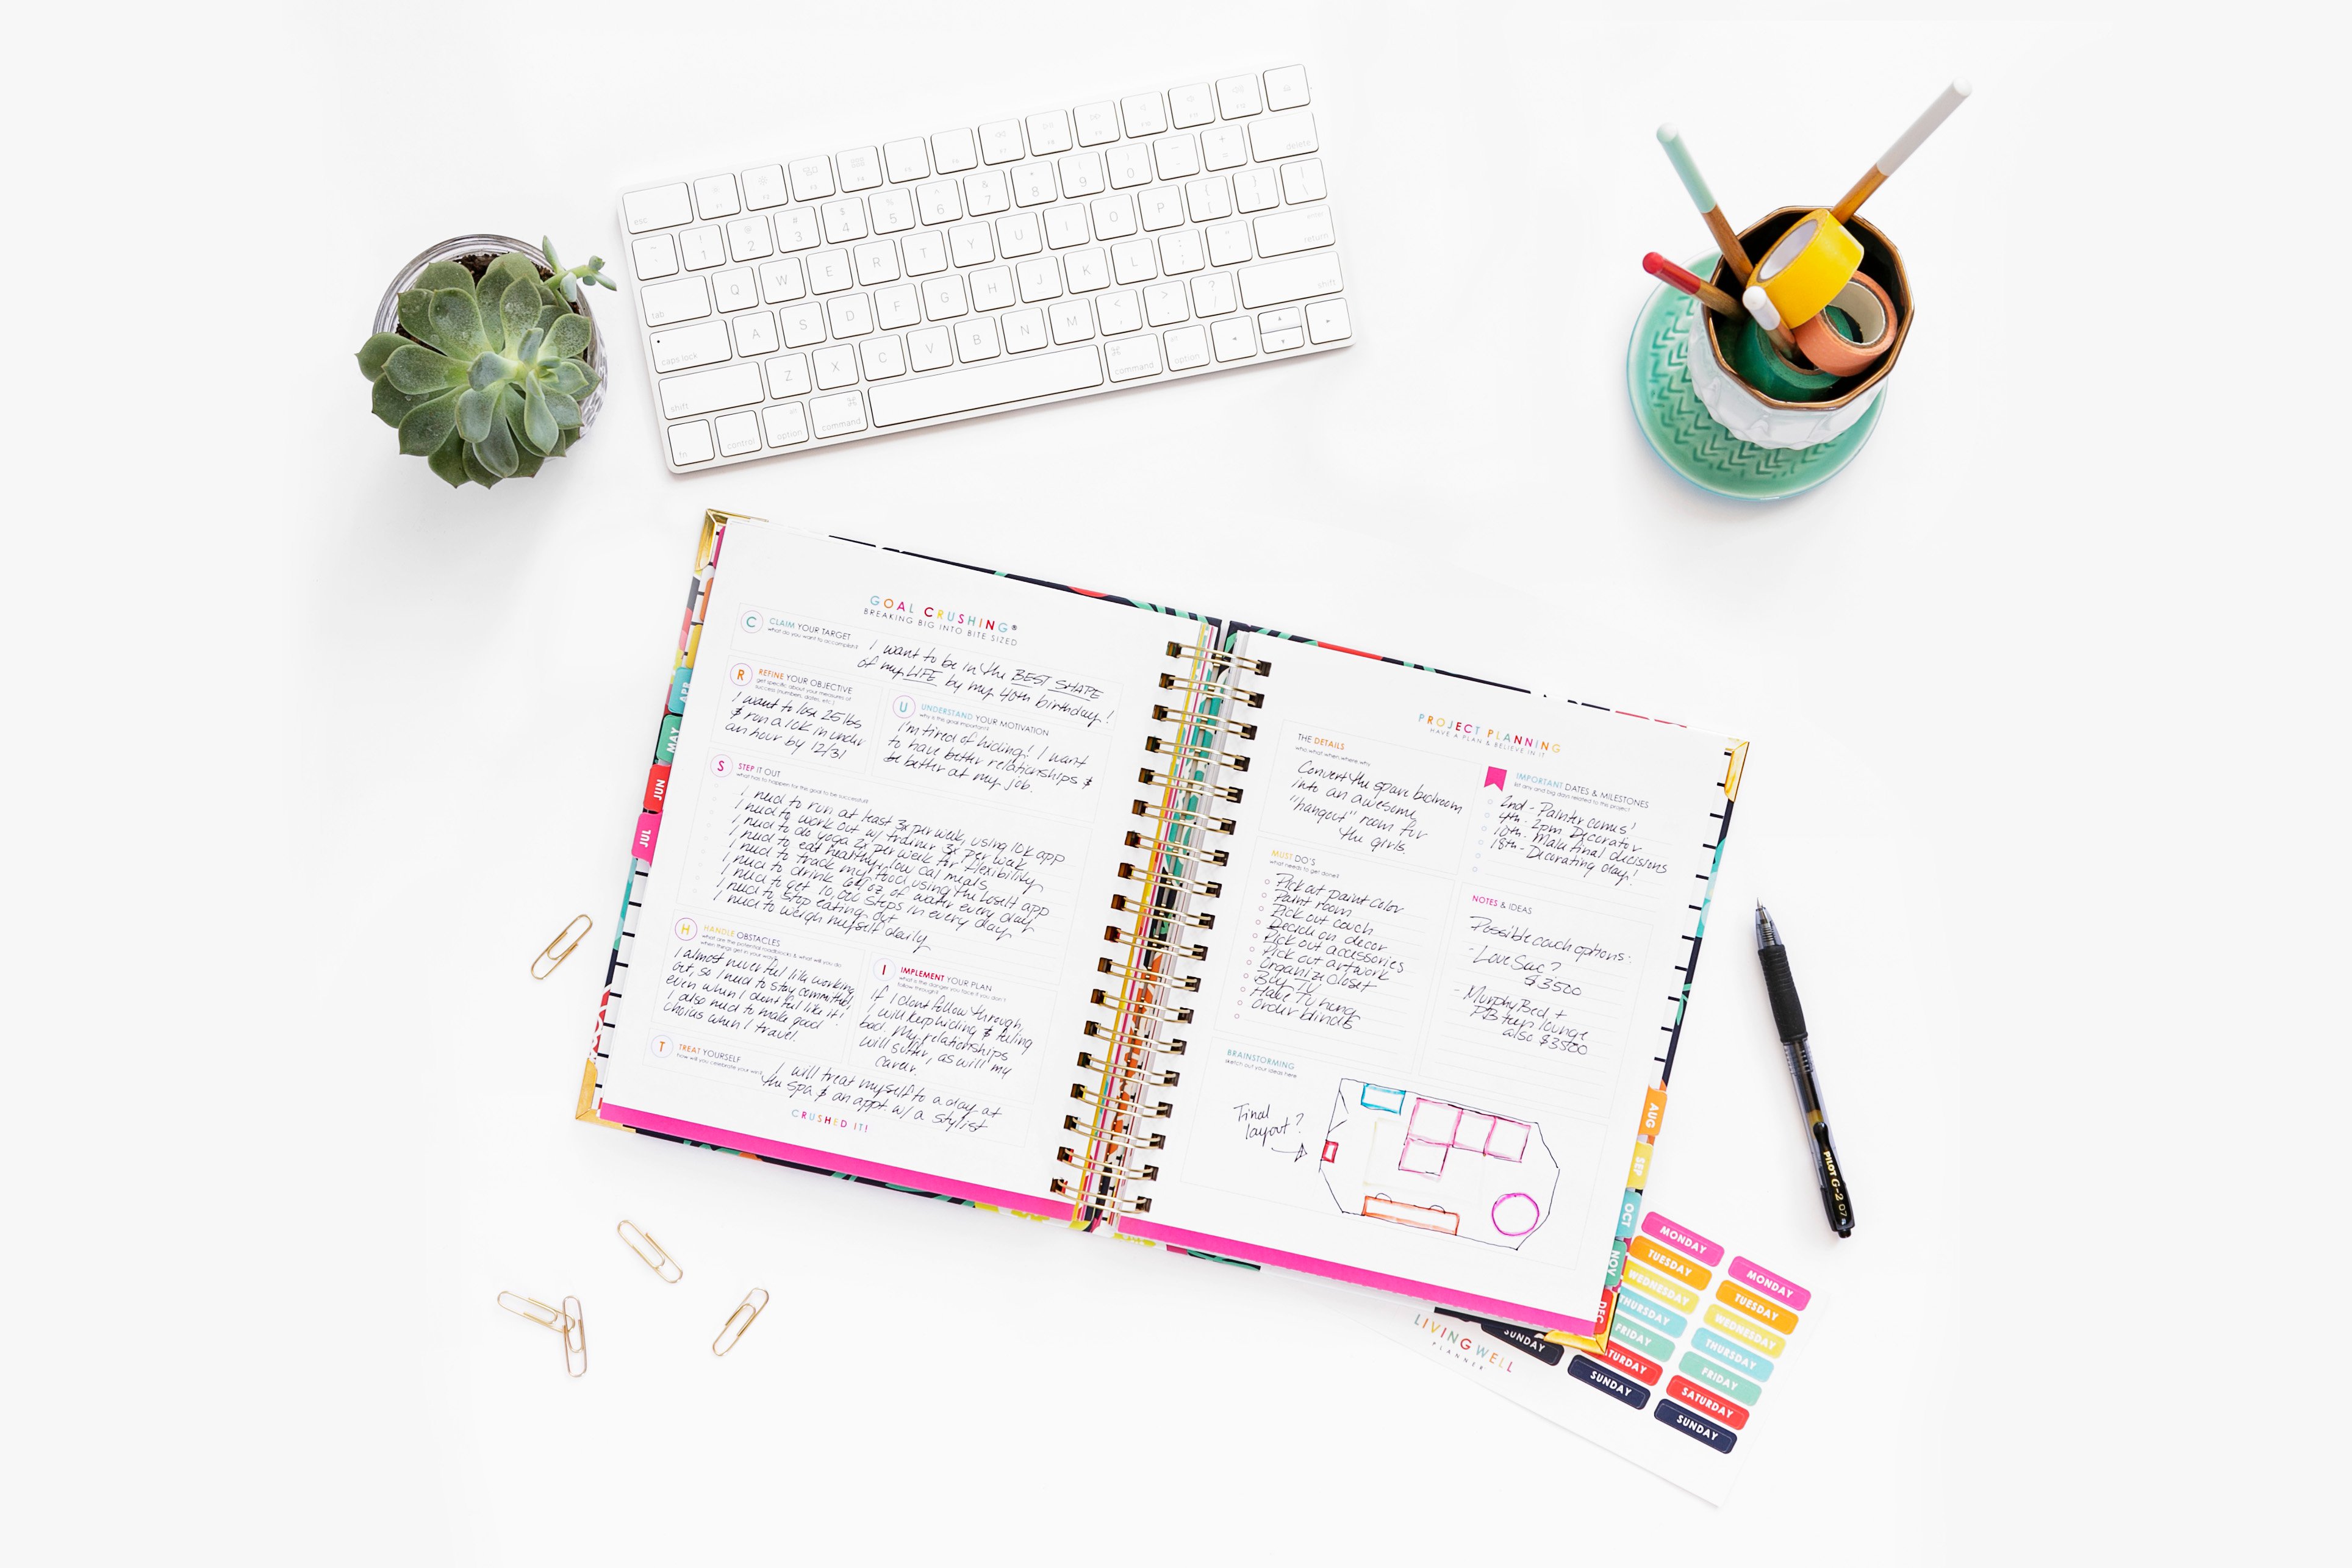 Living Well Planner open on white desk with keyboard, succulent and cup with pencils and washi tape